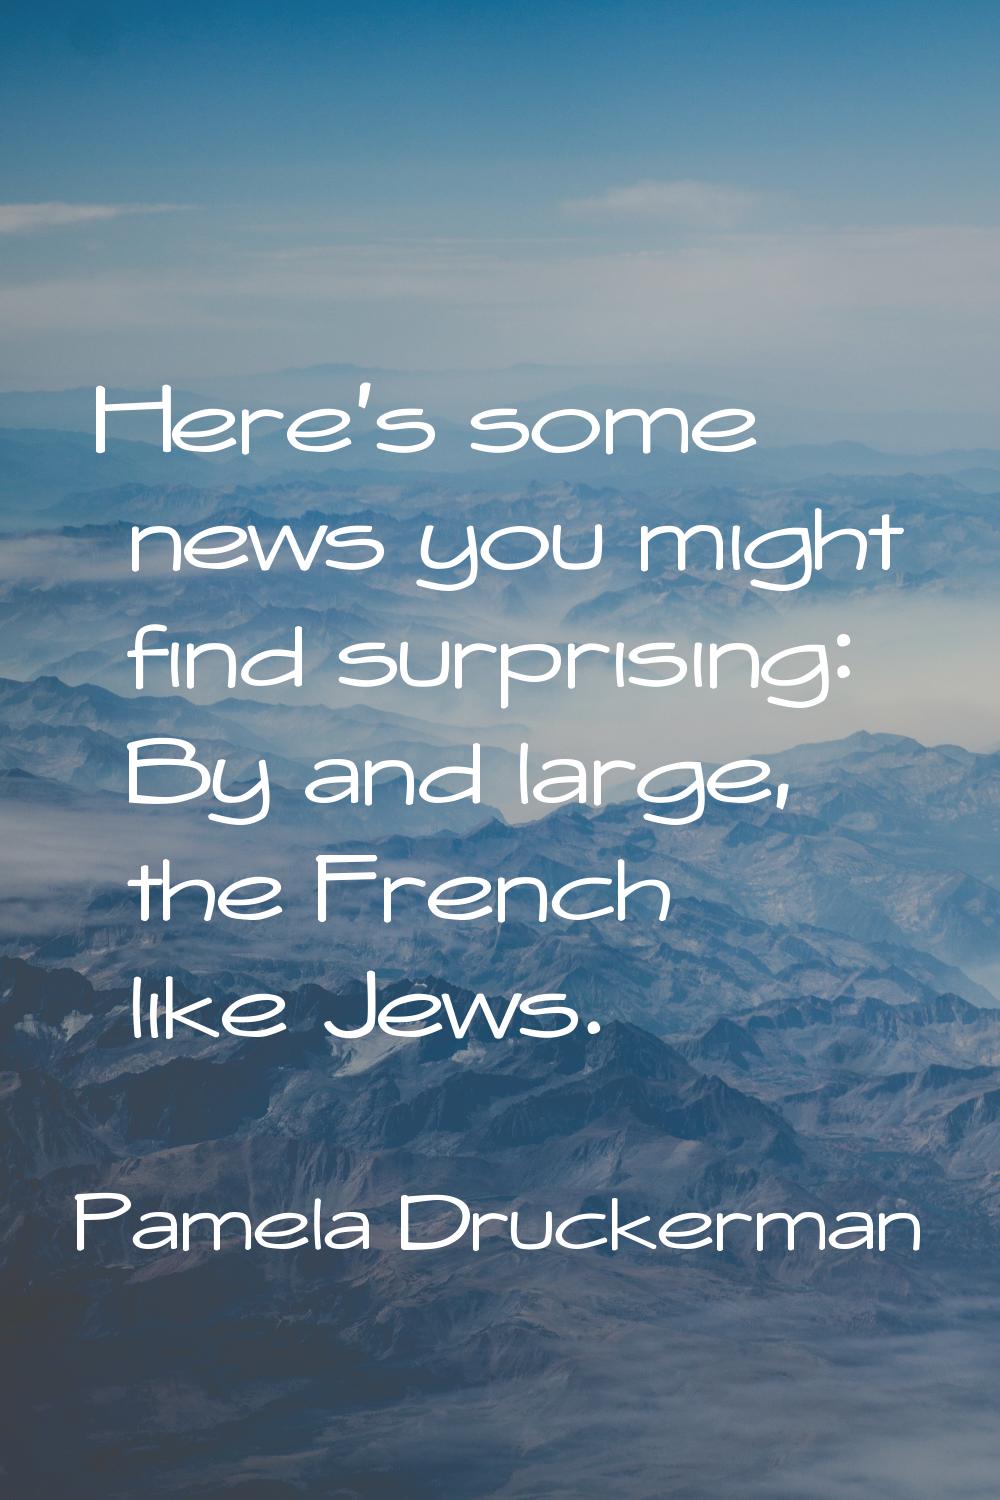 Here's some news you might find surprising: By and large, the French like Jews.